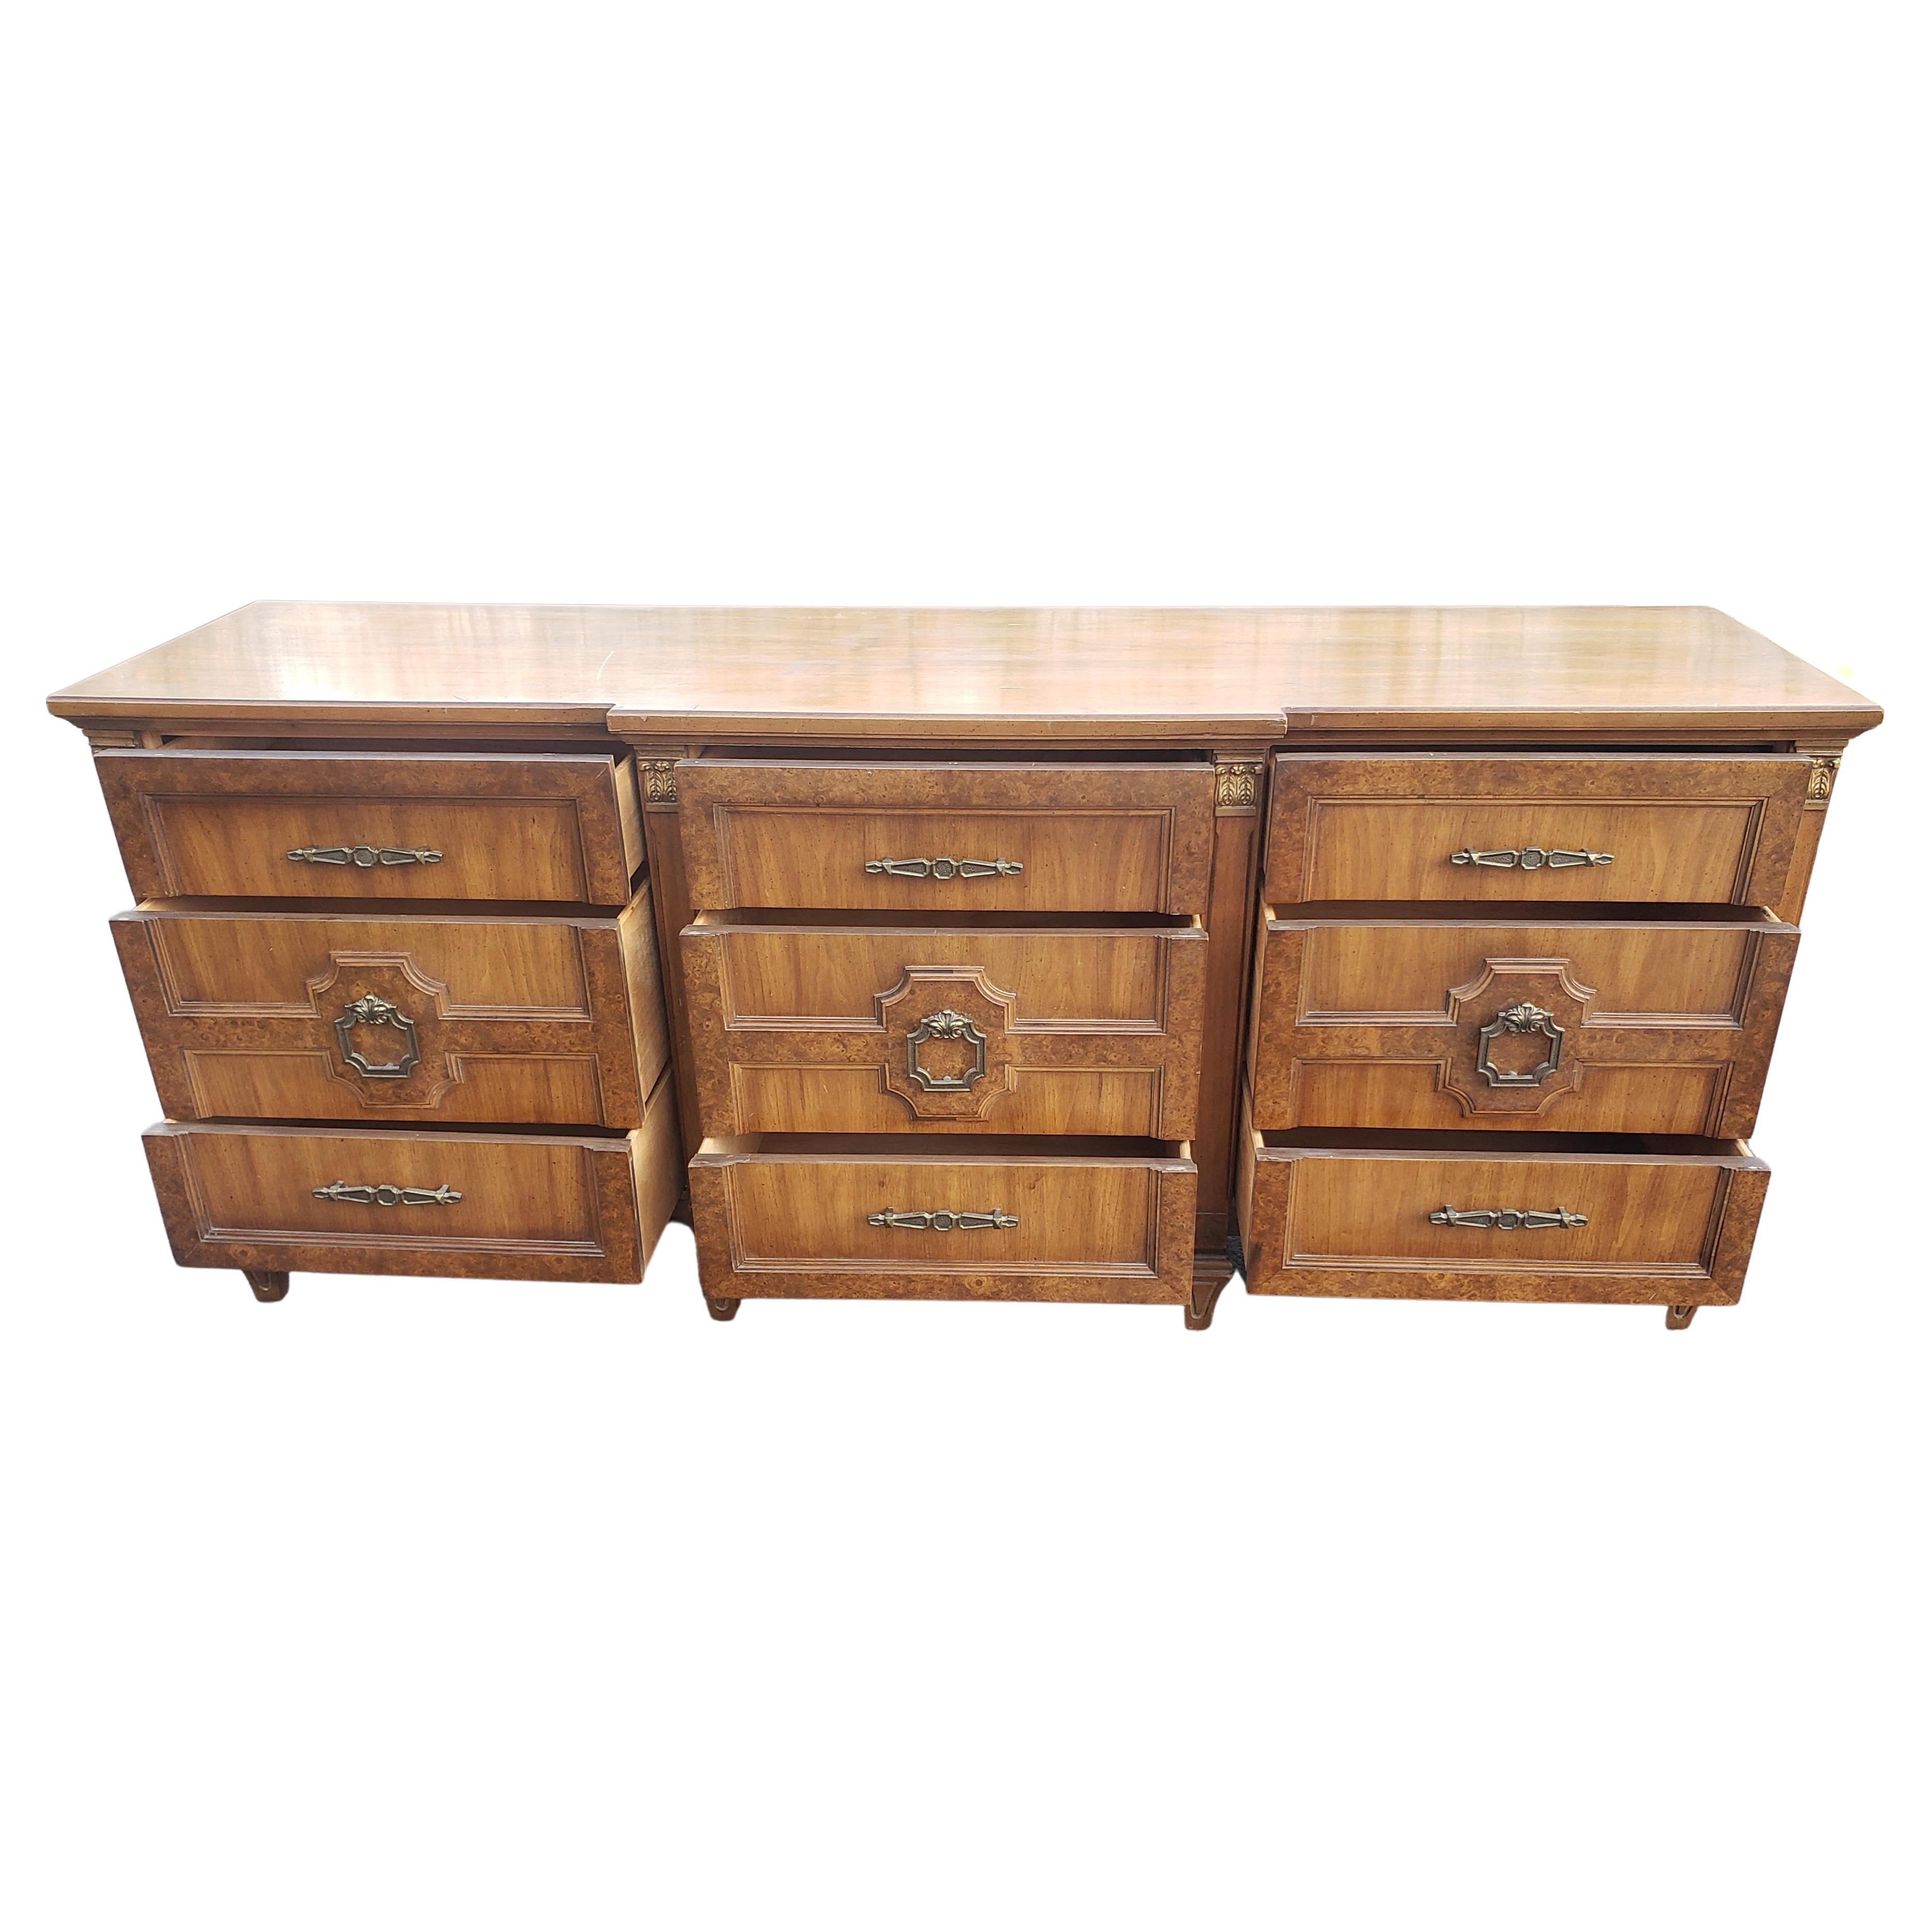 Midcentury Mazor masterpiece burl walnut wide triple dresser with giltwood accents and original hardware.
Measures 76